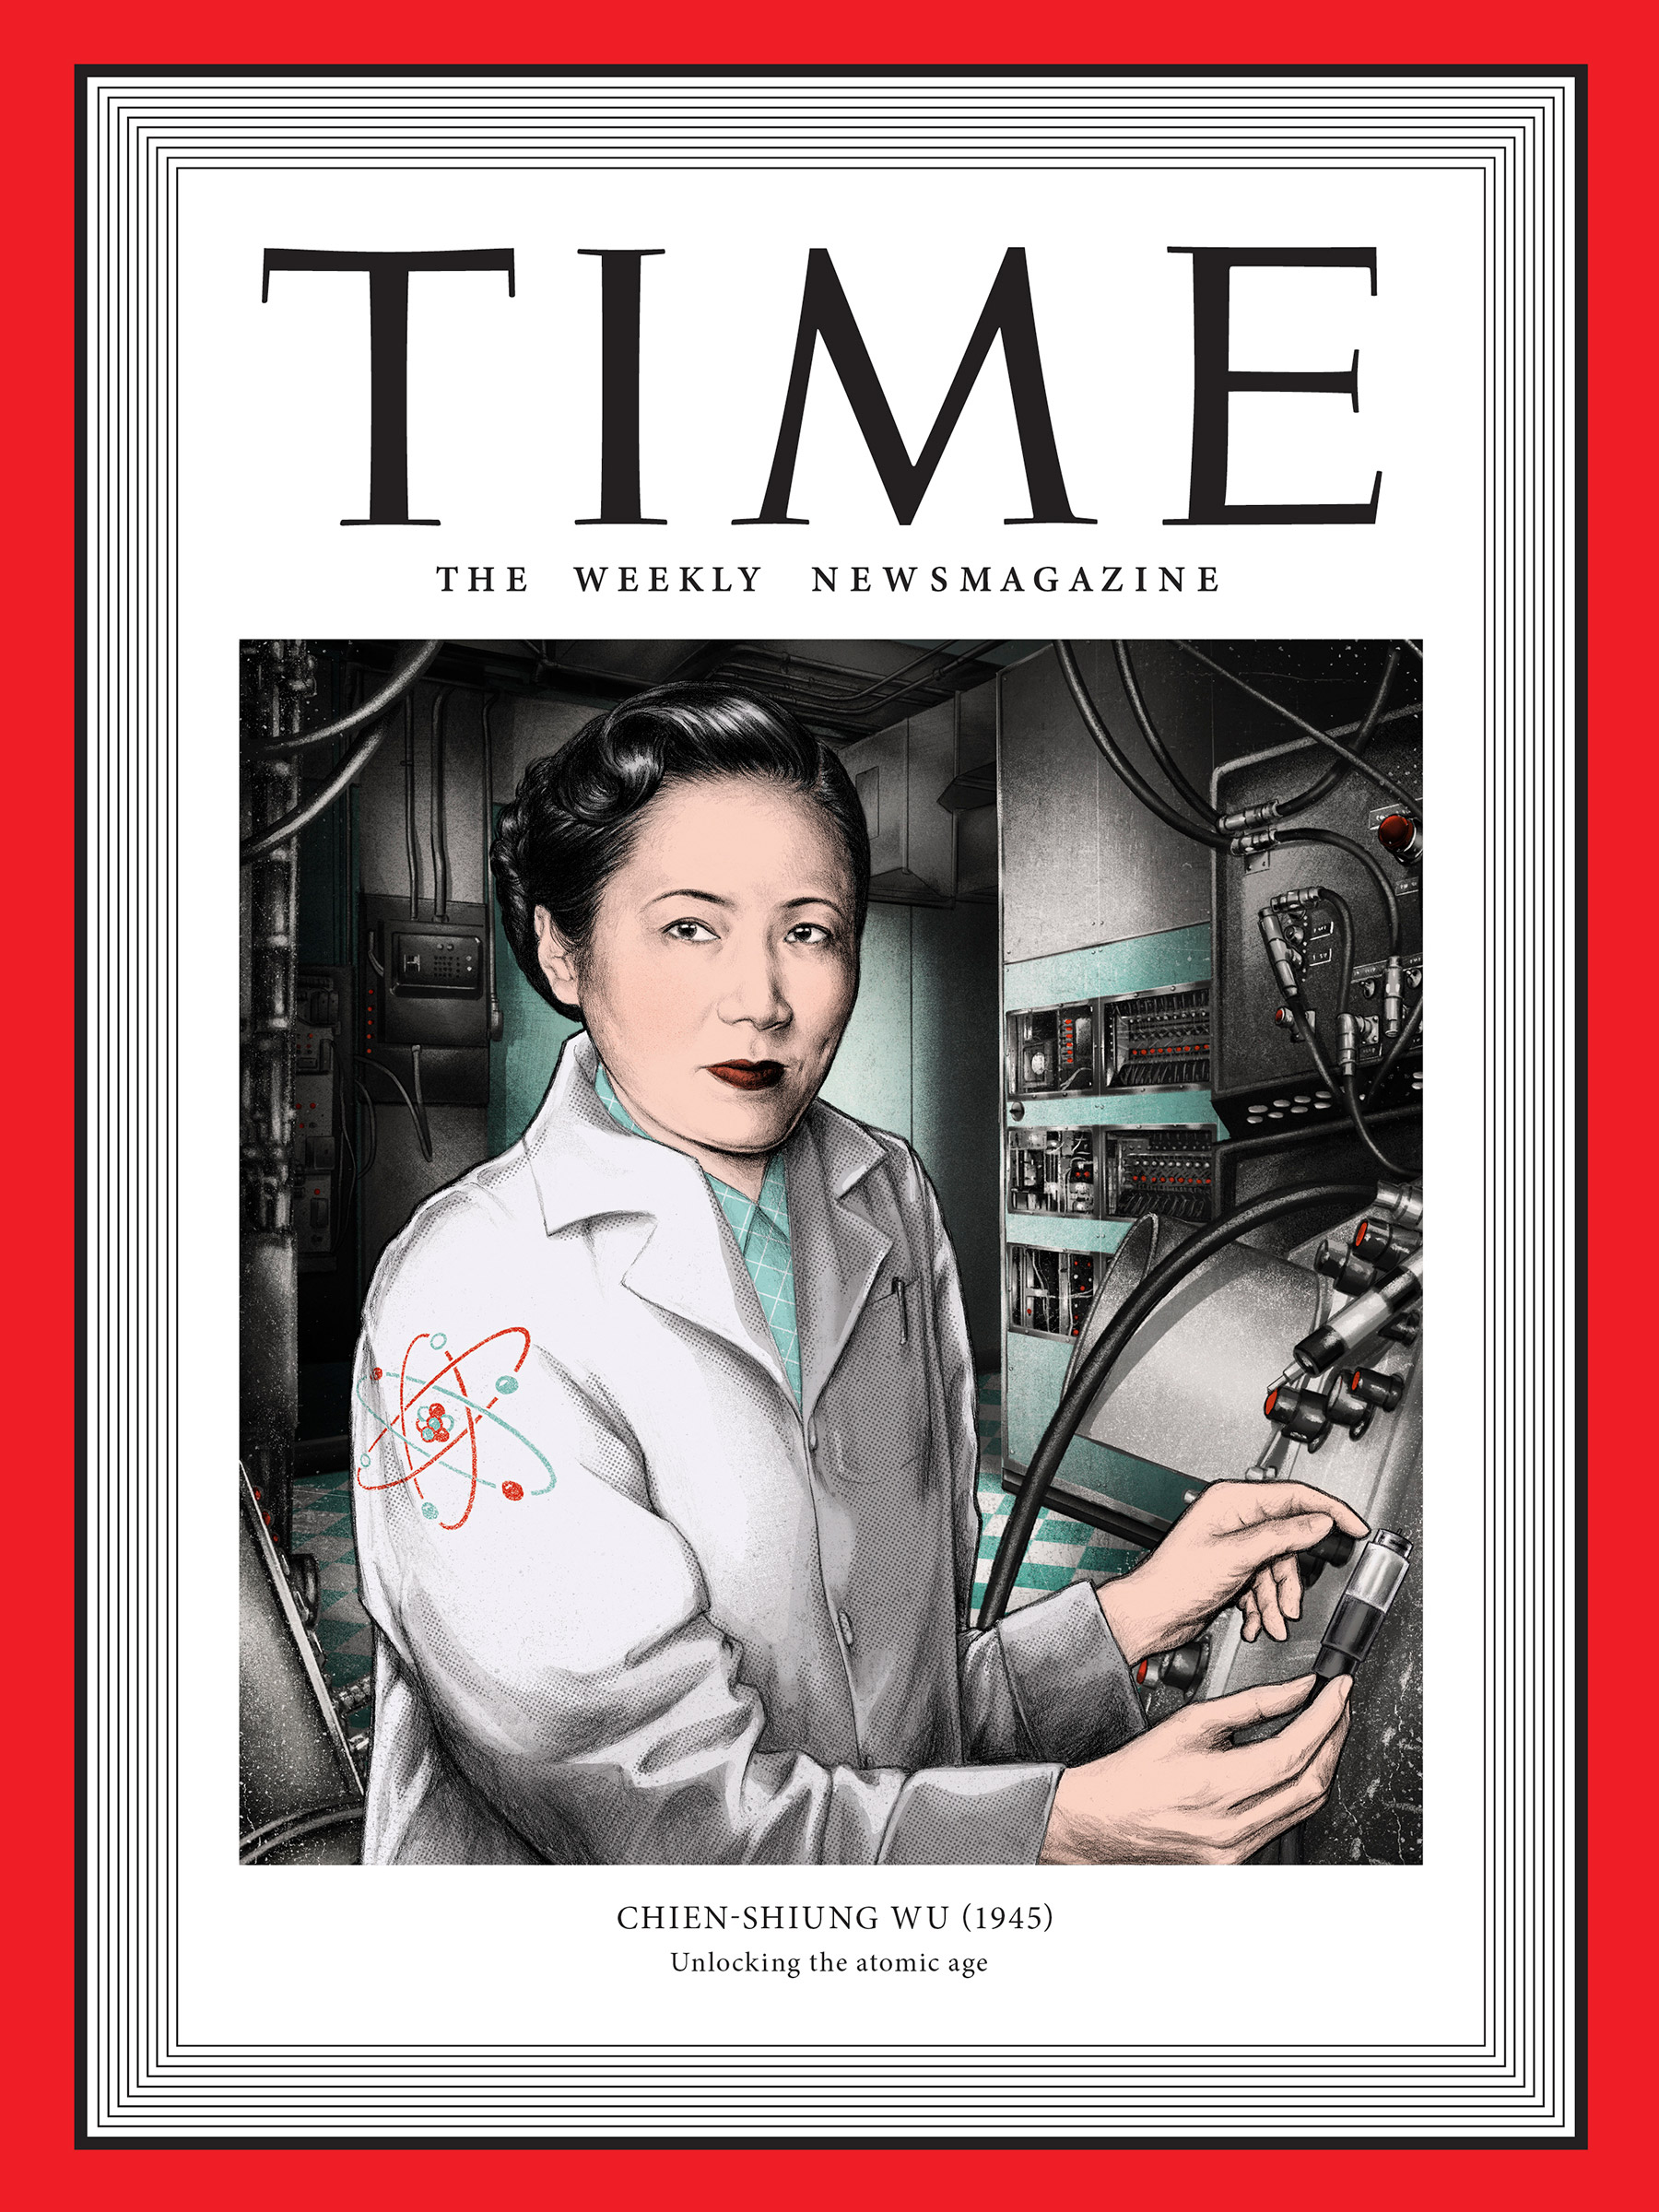 <a href="https://fineartamerica.com/featured/chien-shiung-wu-1945-time.html"><strong>Buy the cover art→</strong></a> (Illustration by Jennifer Dionisio for TIME; Bettmann/Getty)